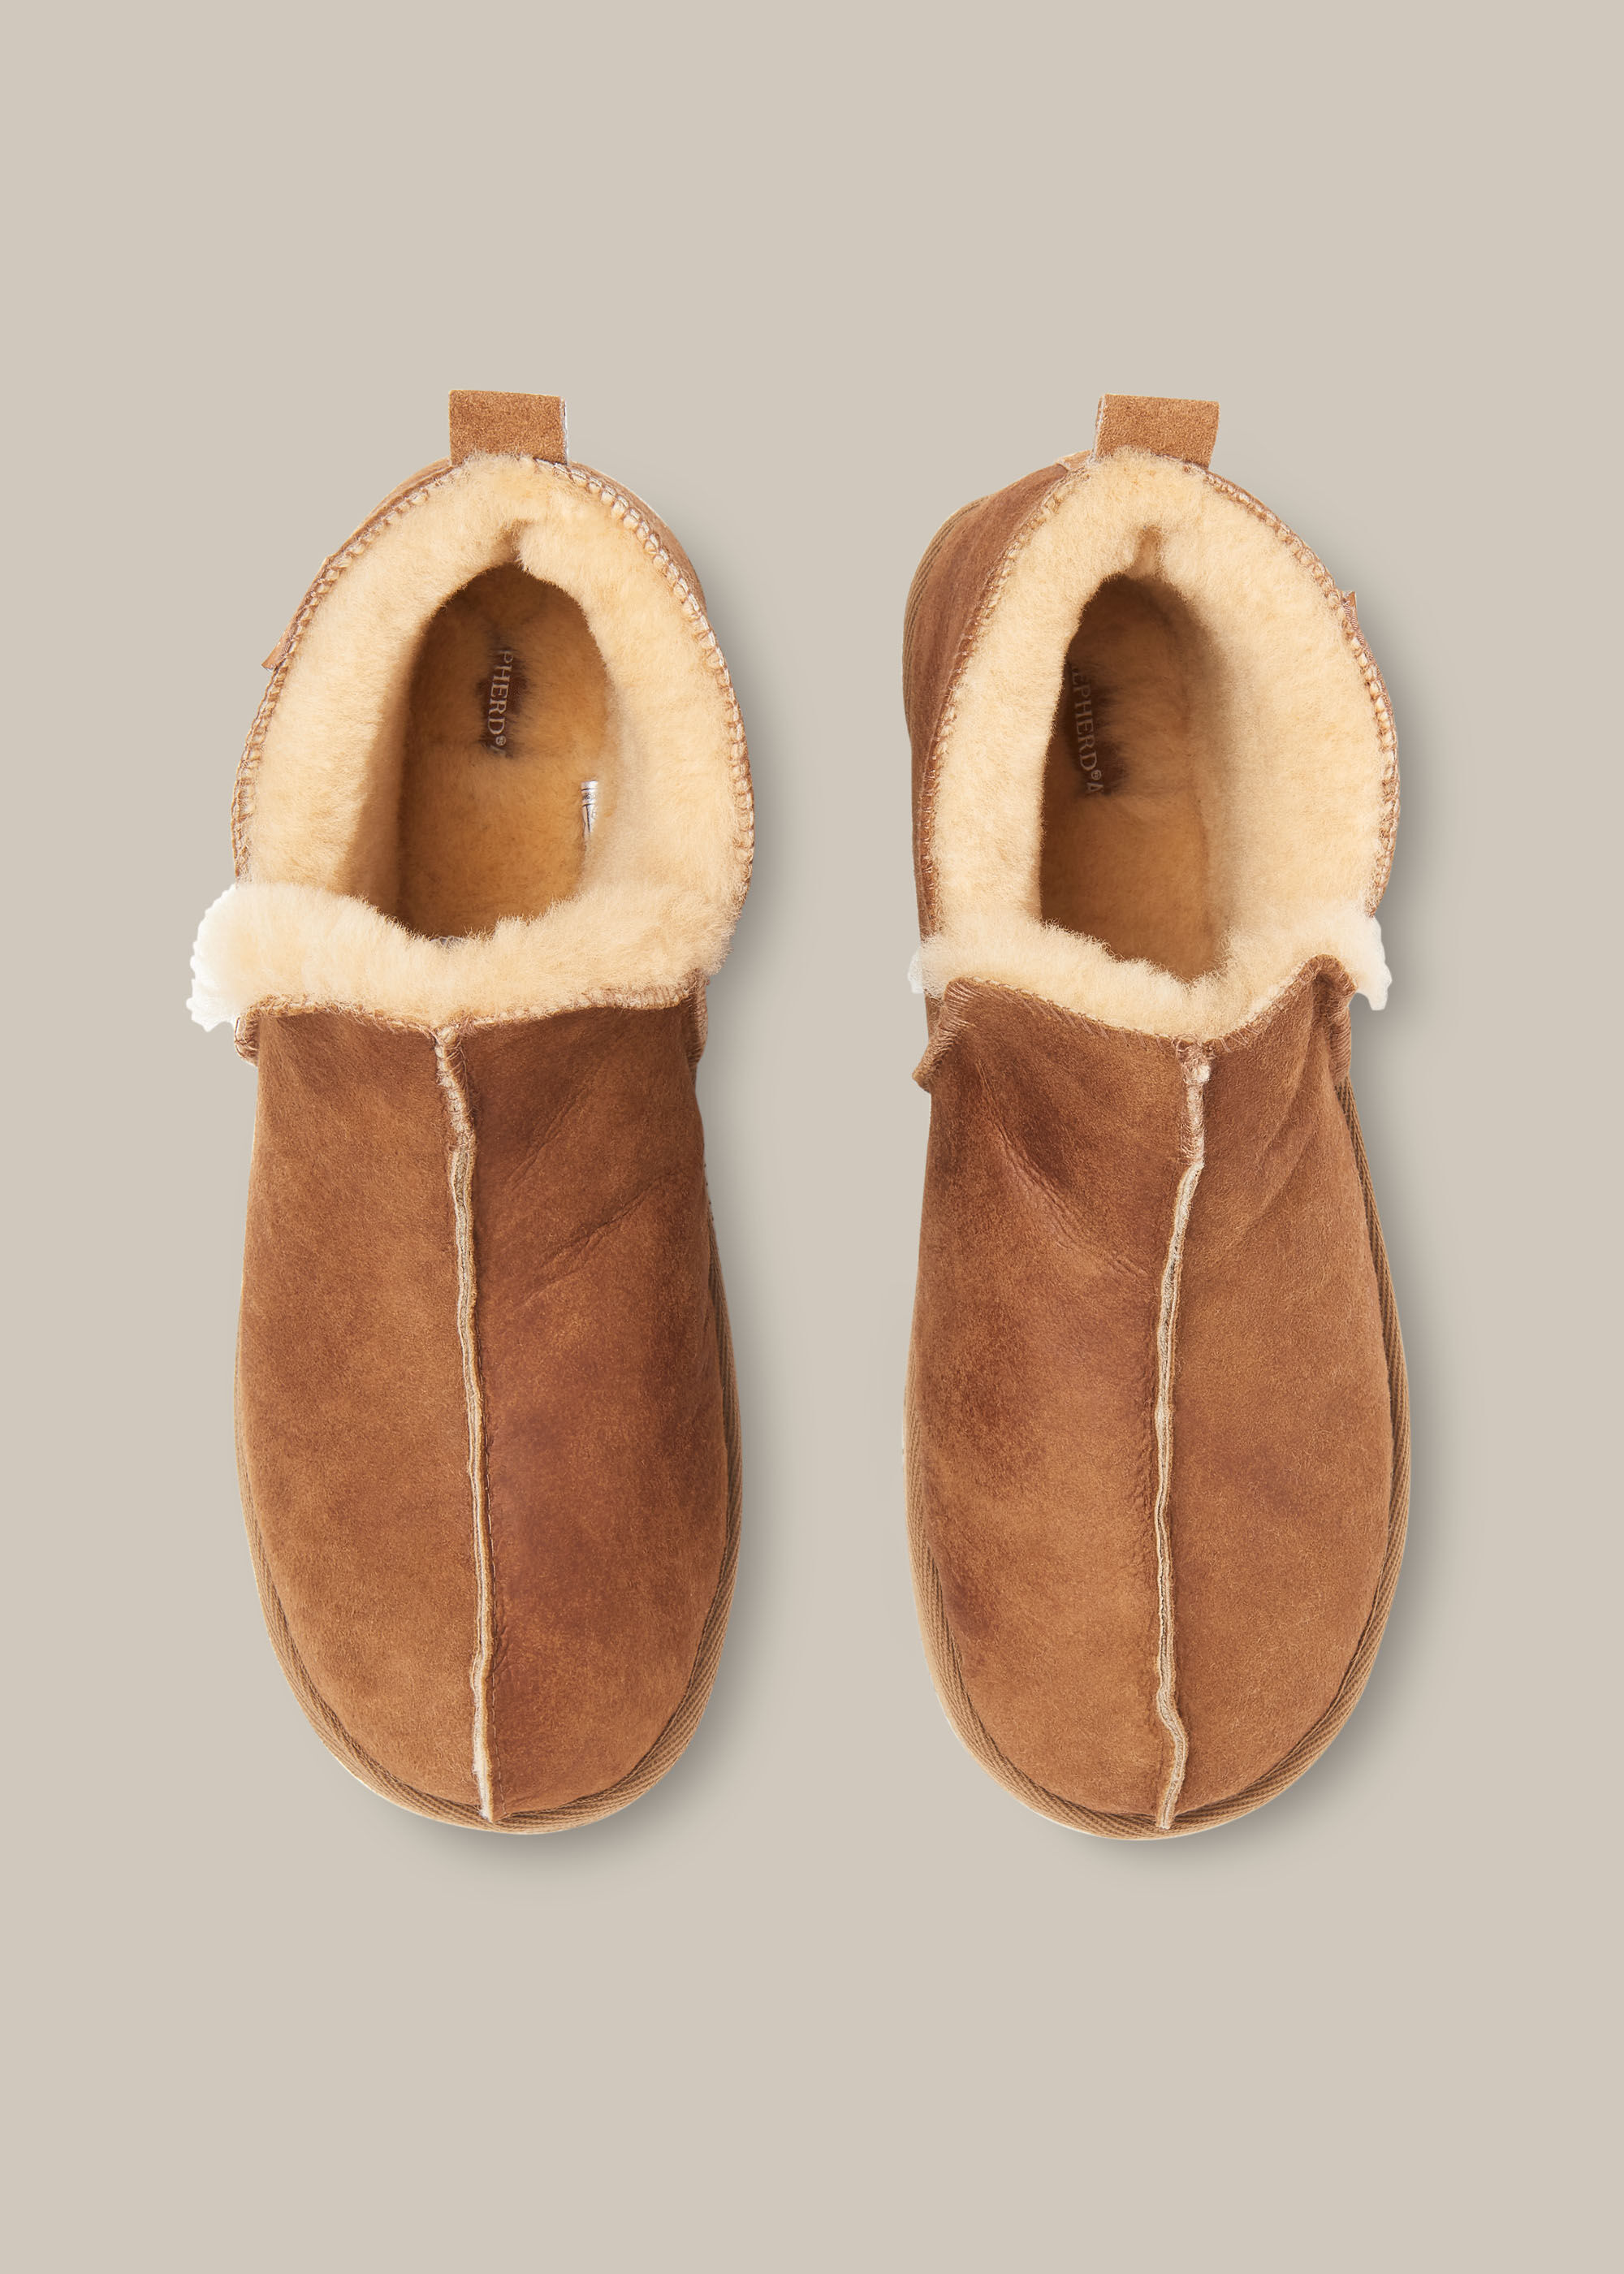 Annie' Slippers by Shepherd of Sweden. – Chalet at Home